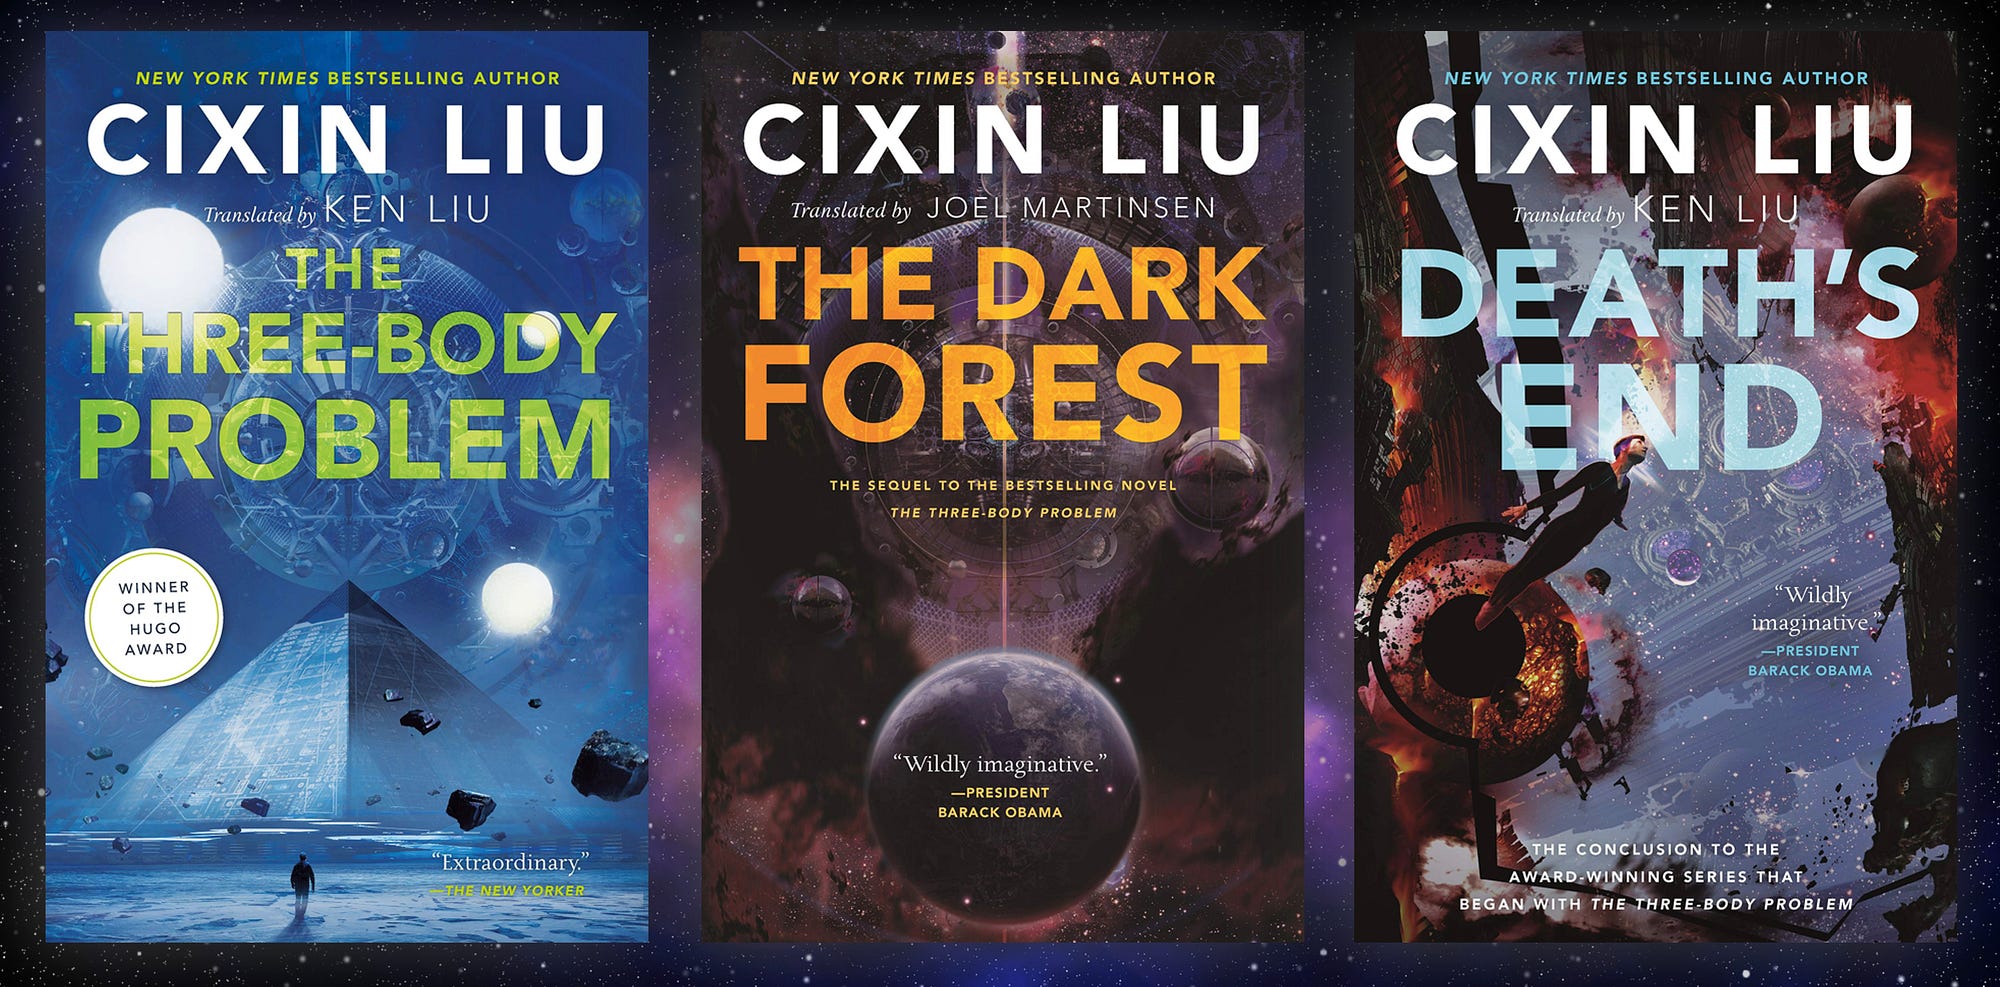 From the beginning to the end: Liu Cixin's Three-Body Trilogy